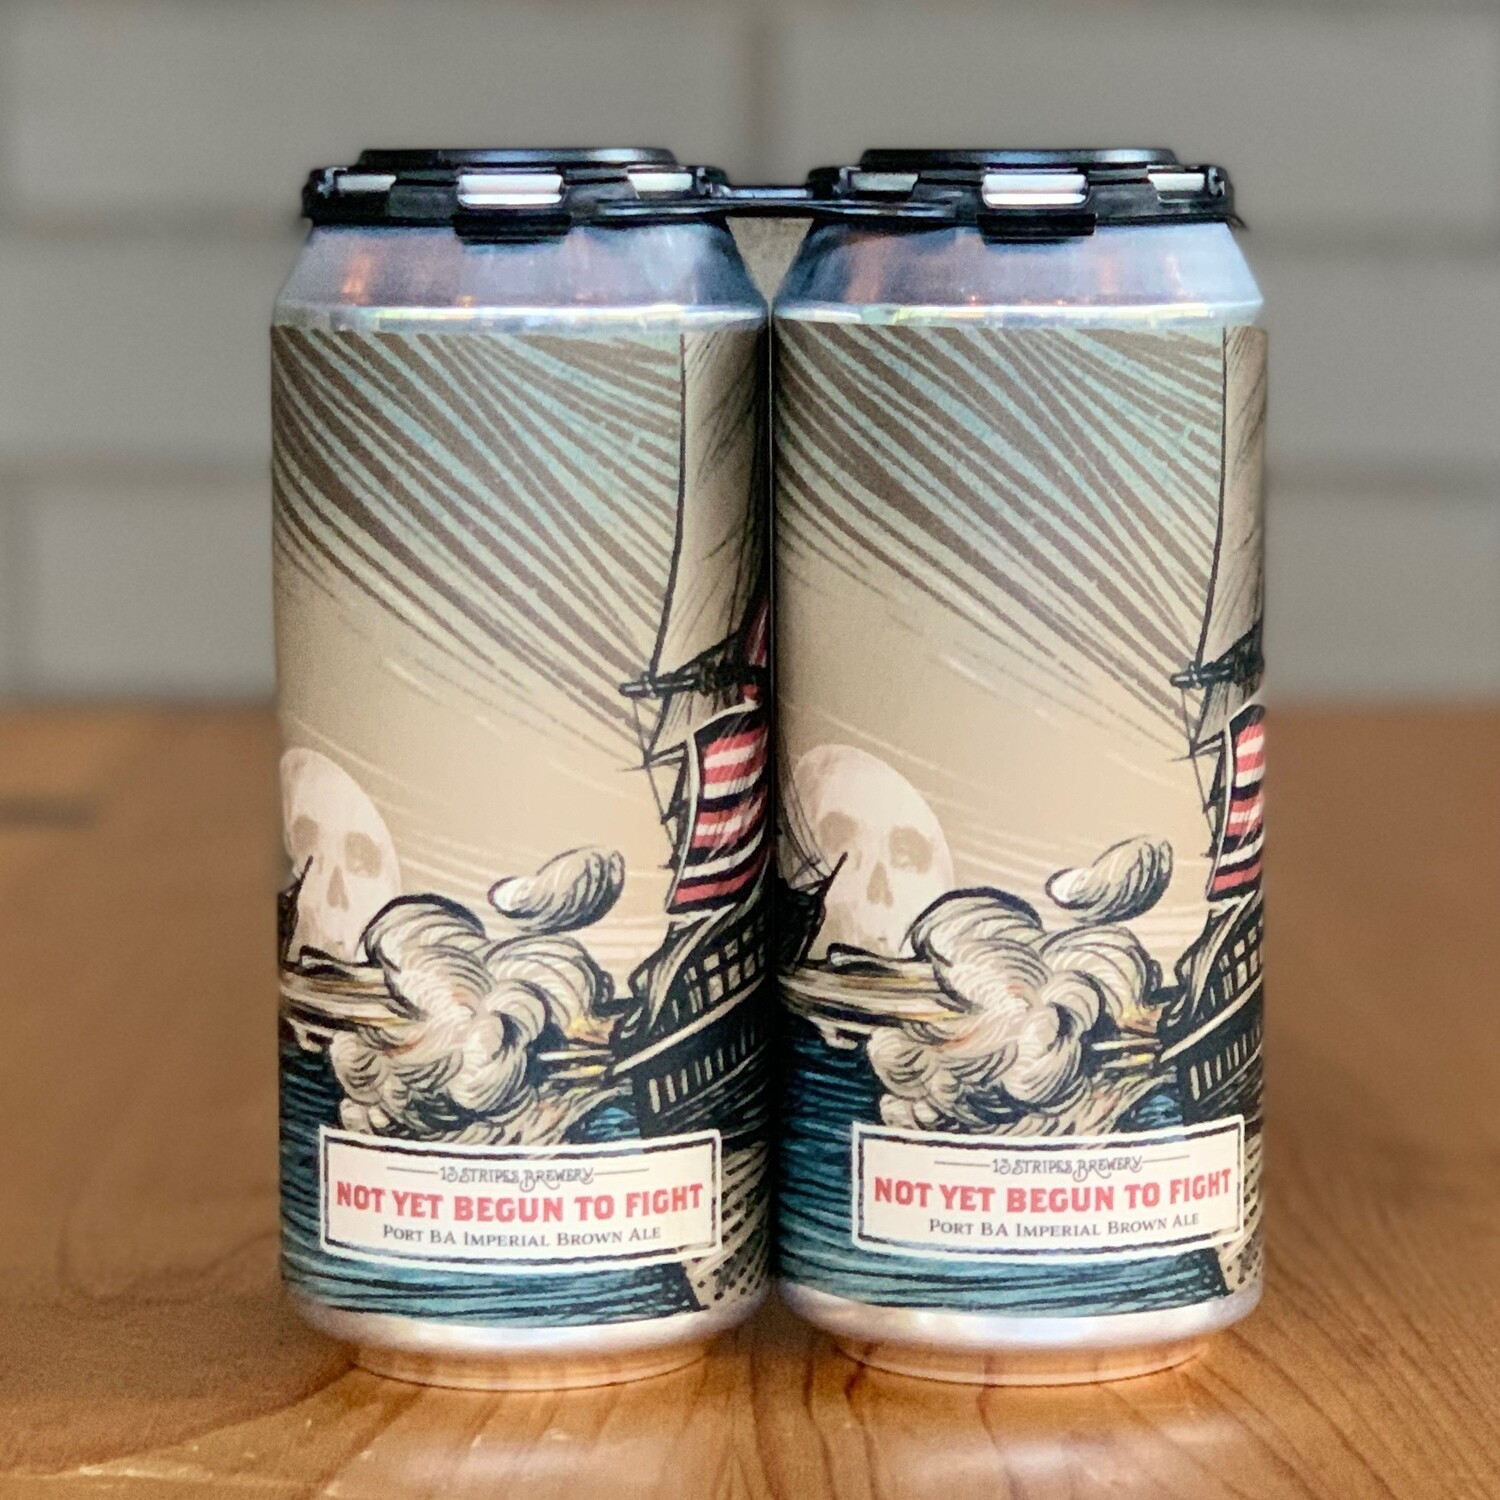 13 Stripes Brewery Not Yet Begun To Fight (2pk)